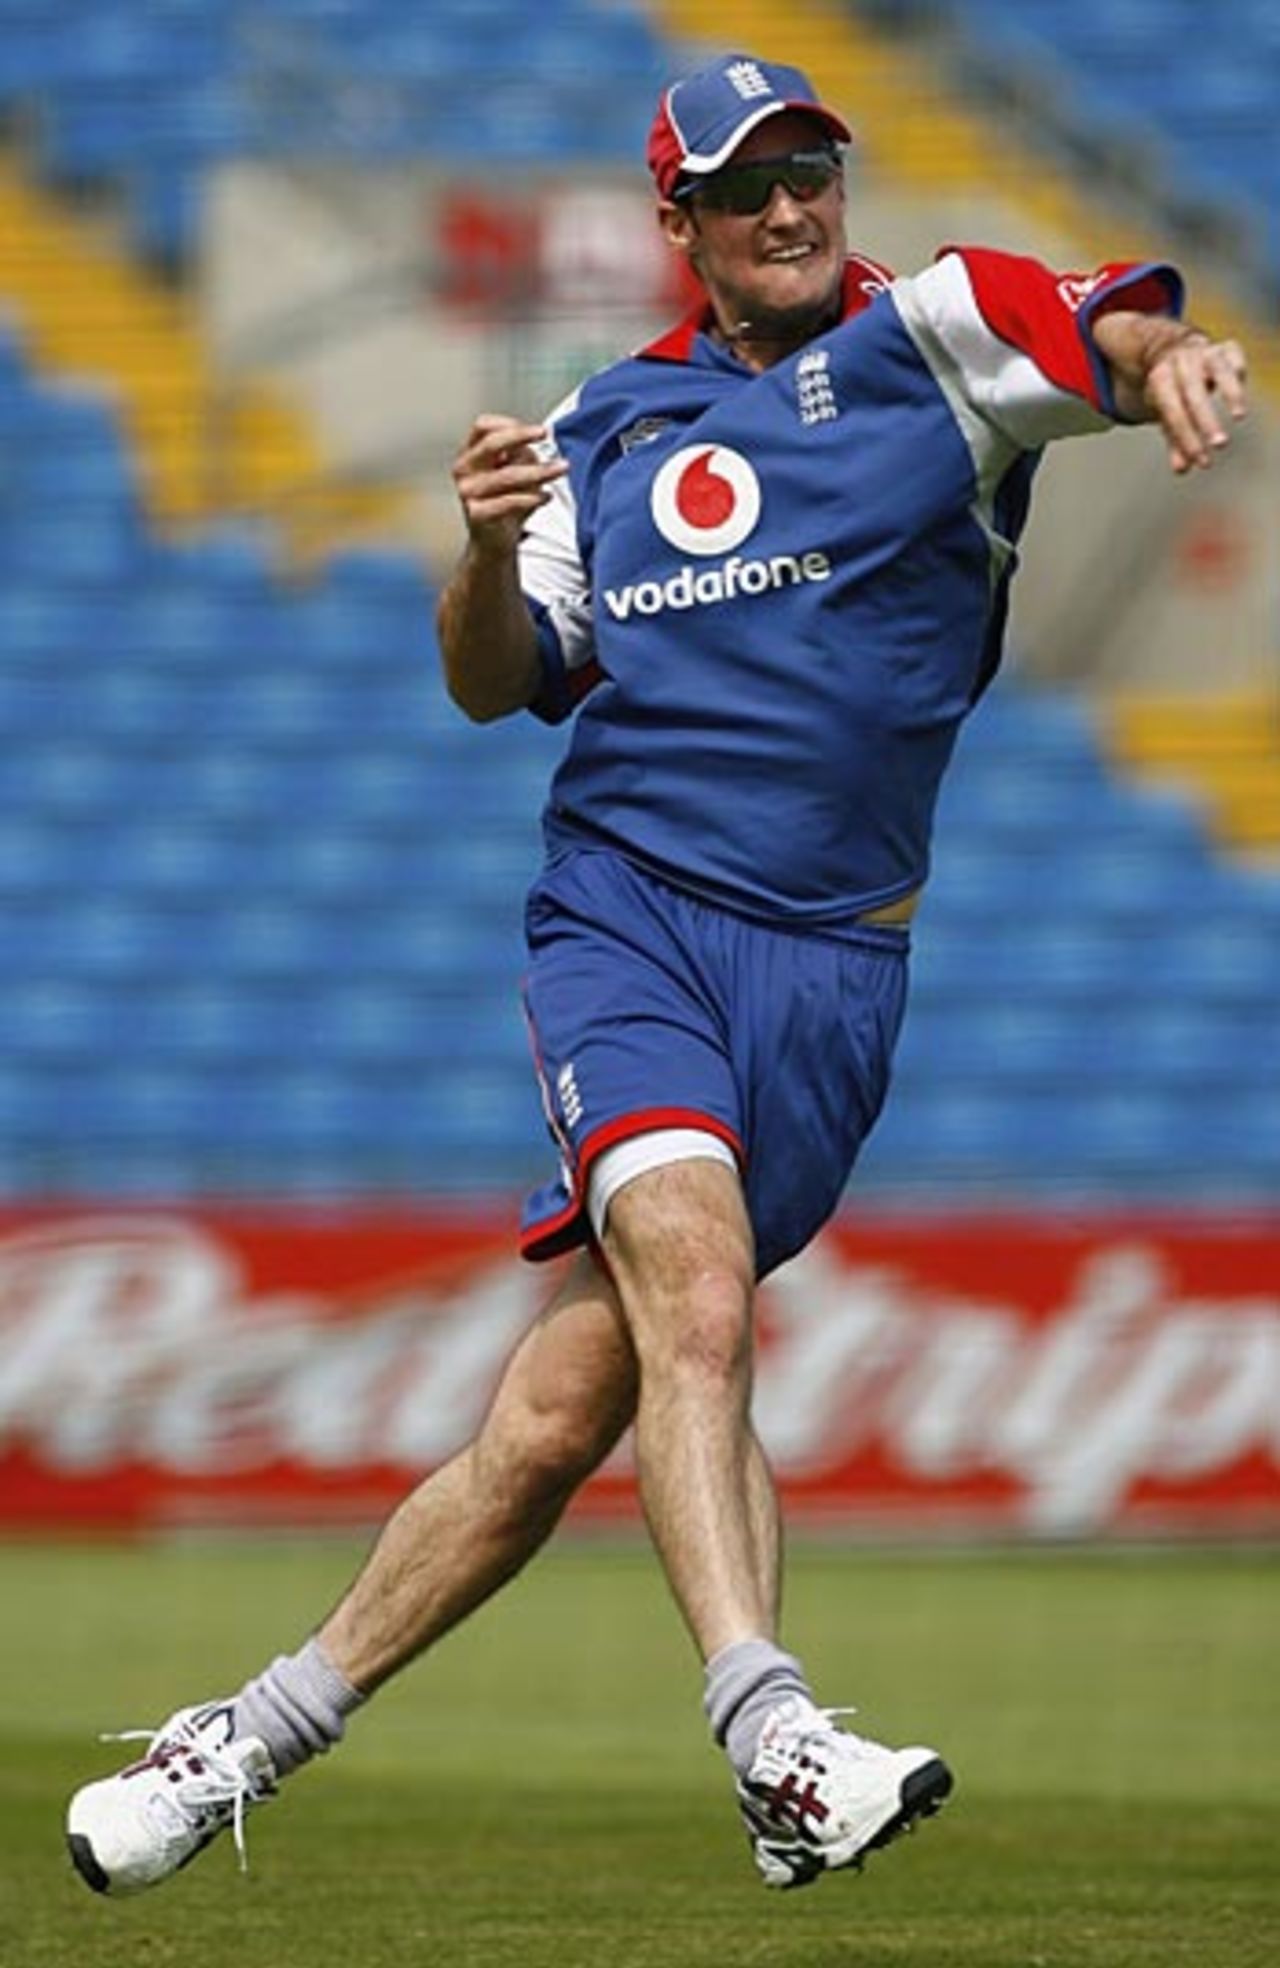 Andrew Strauss fires in a throw during a net session ahead of the fifth one-dayer at Headingley, June 30, 2006